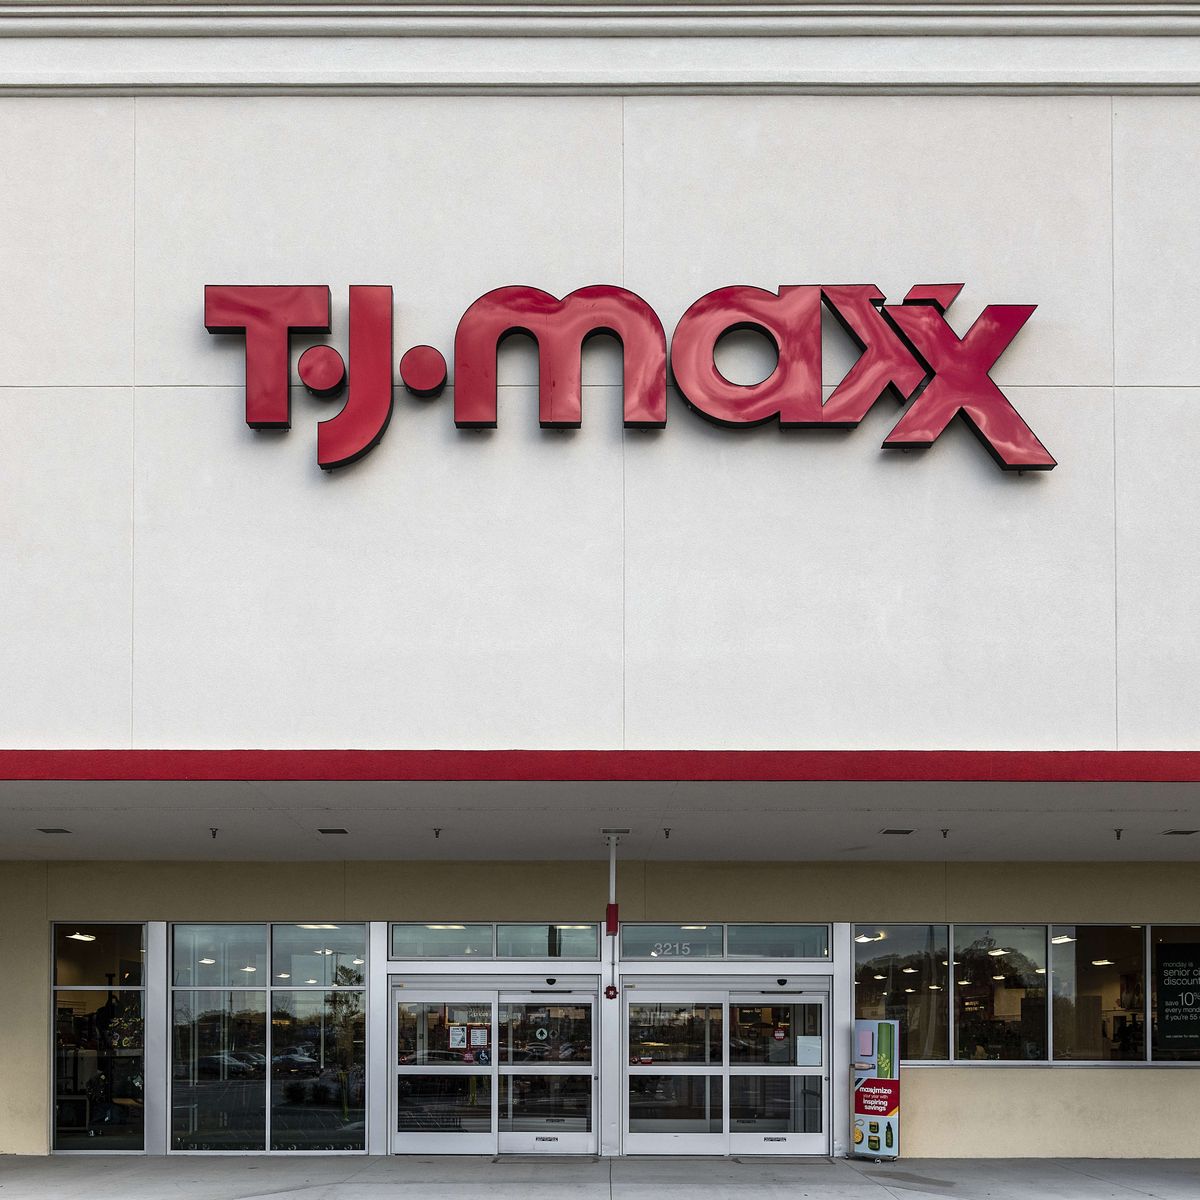 Home Goods & TJMaxx are Opening Back Up and The Clearance is Amazing!